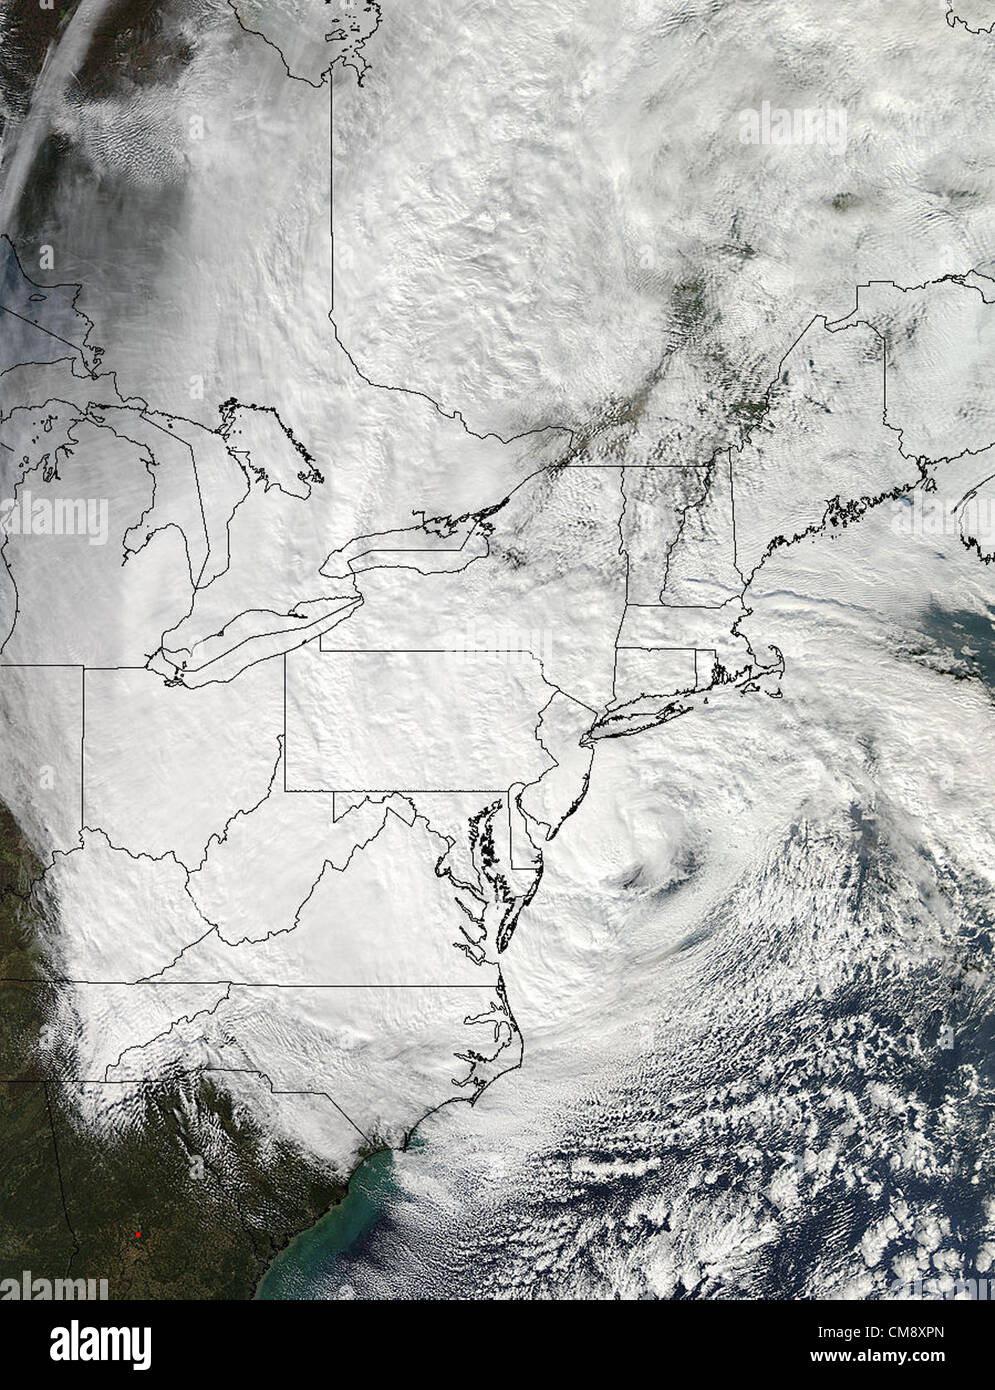 NASA's Aqua satellite captured a visible image Sandy's massive circulation on Oct. 29 at 18:20 UTC (2:20 p.m. EDT). Sandy covers 1.8 million square miles, from the Mid-Atlantic to the Ohio Valley, into Canada and New England. Credit: Archive Image/NASA Stock Photo